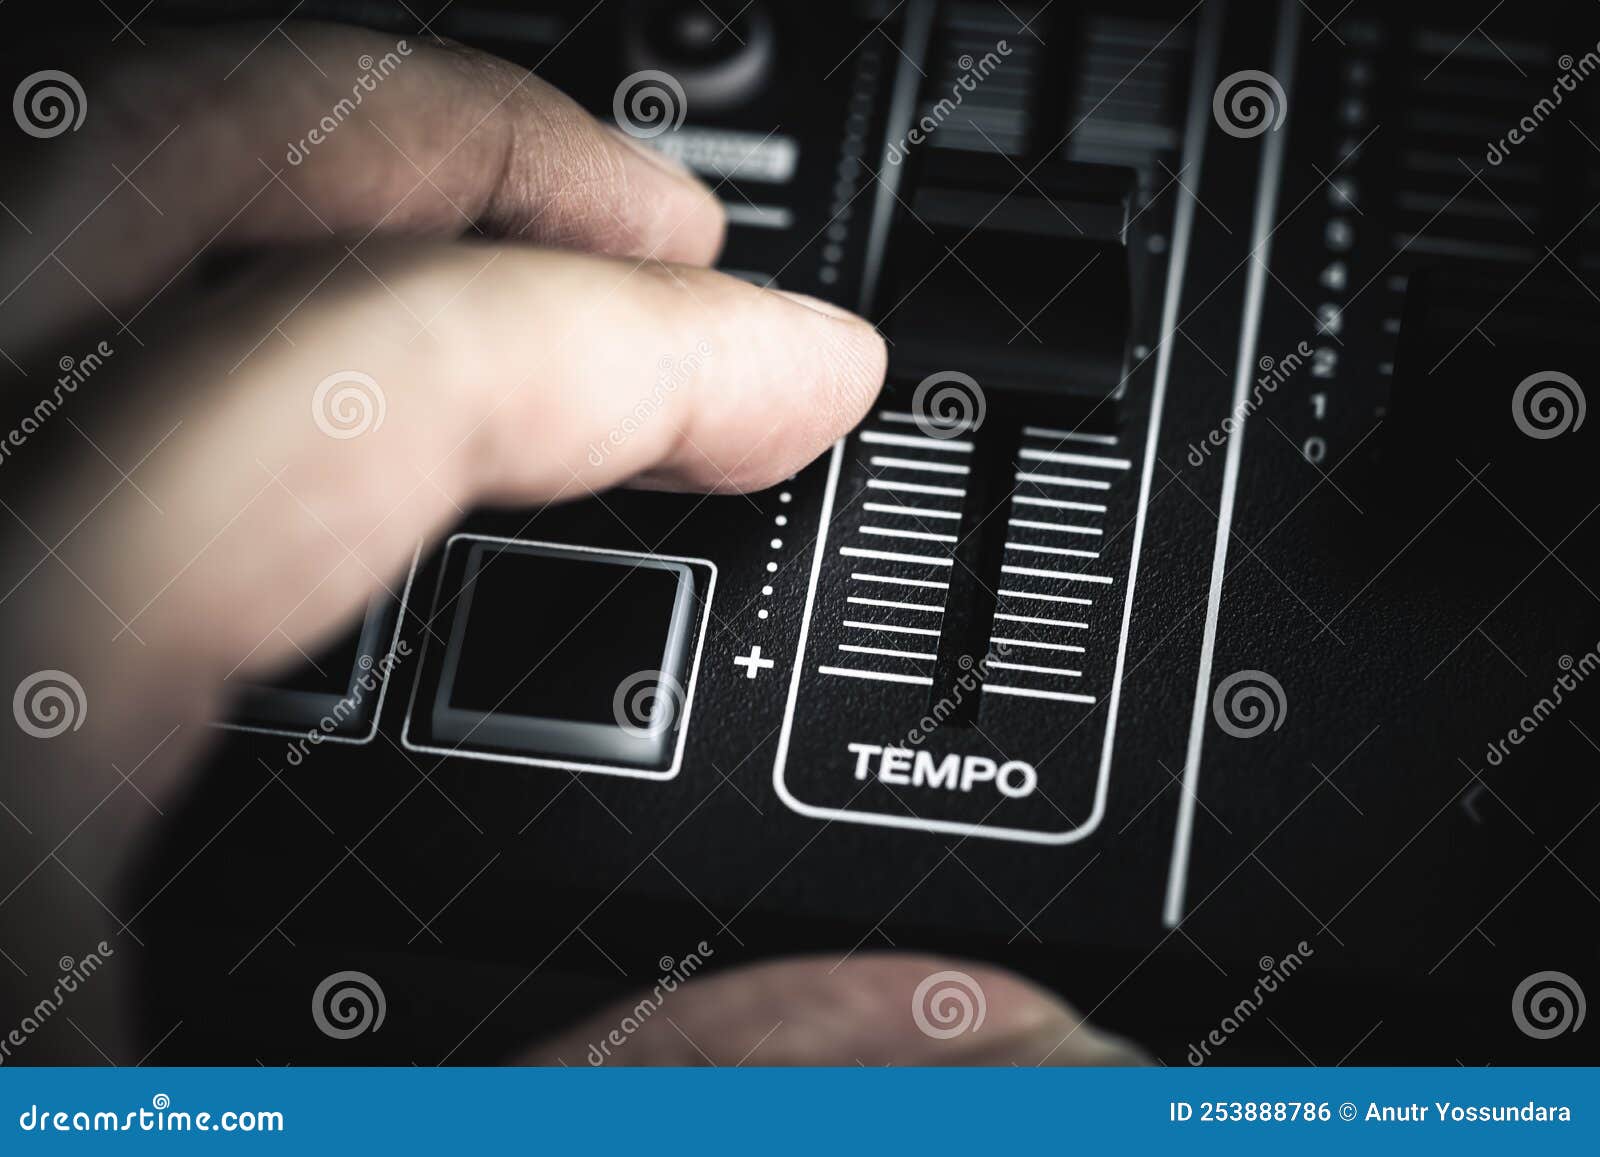 controlling the tempo bpm fader on a dj mixing deck controller